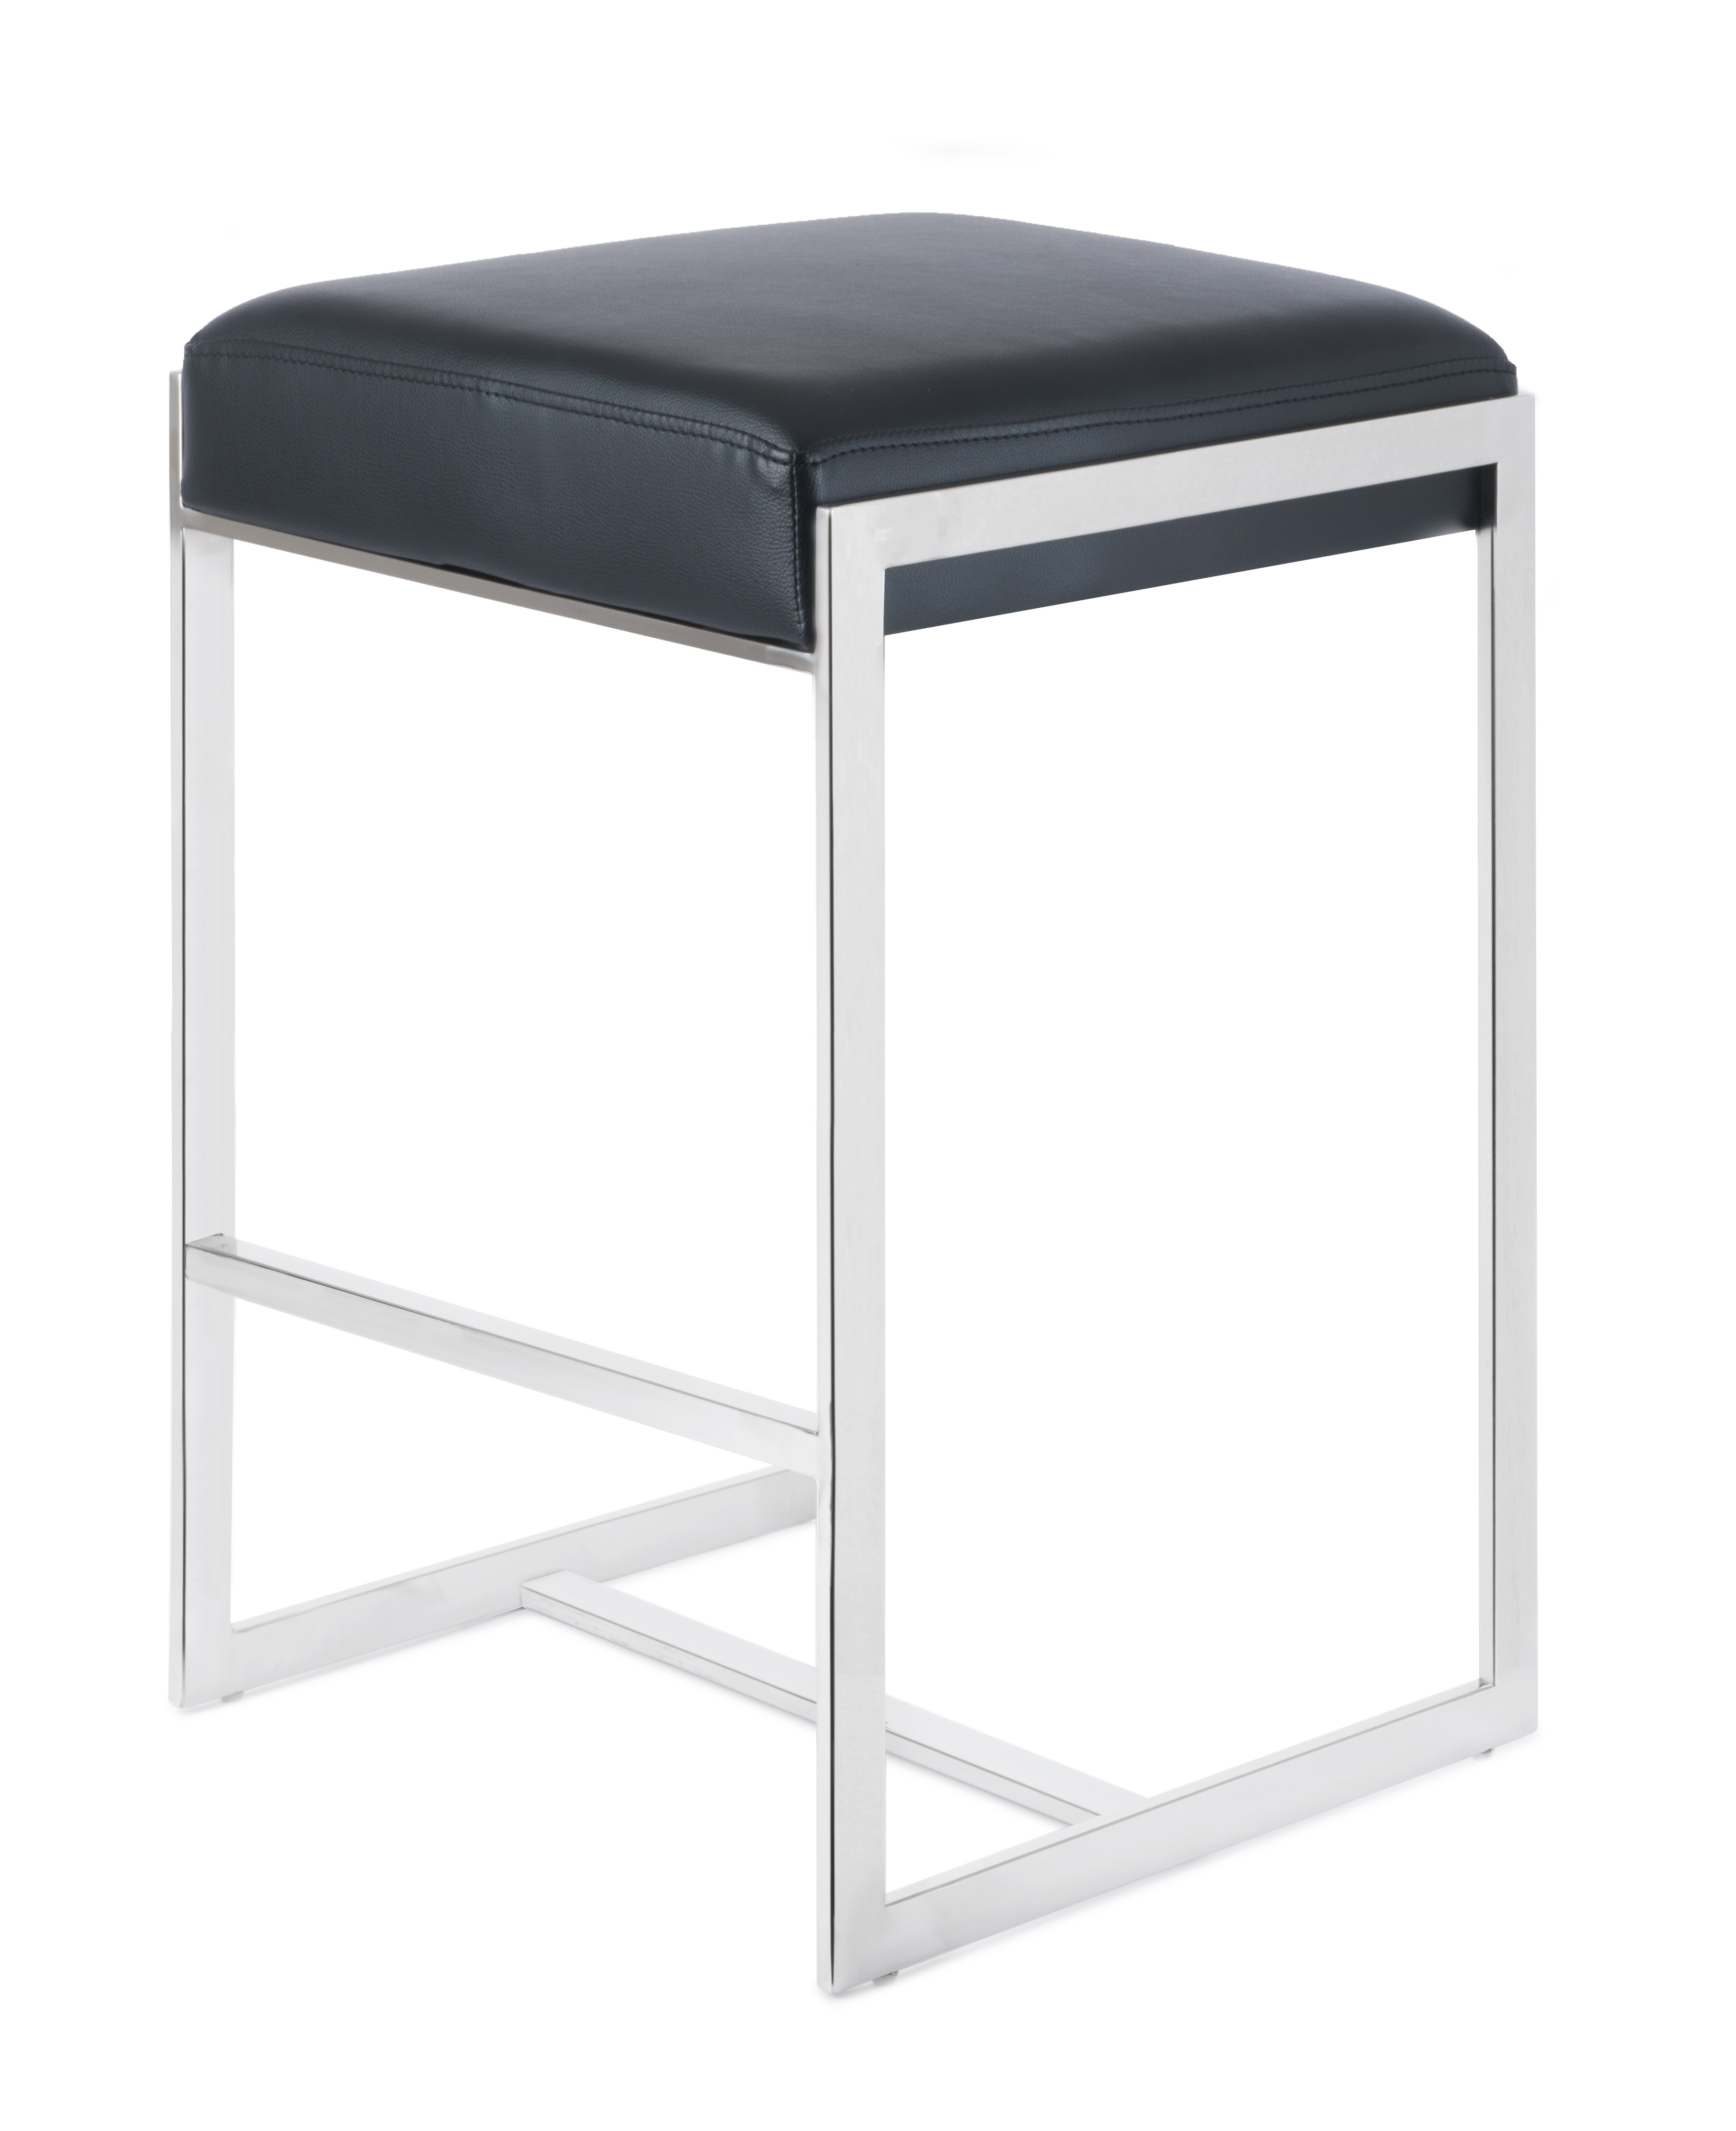 palmer-counter-stool-in-black-with-polished-frame.jpg